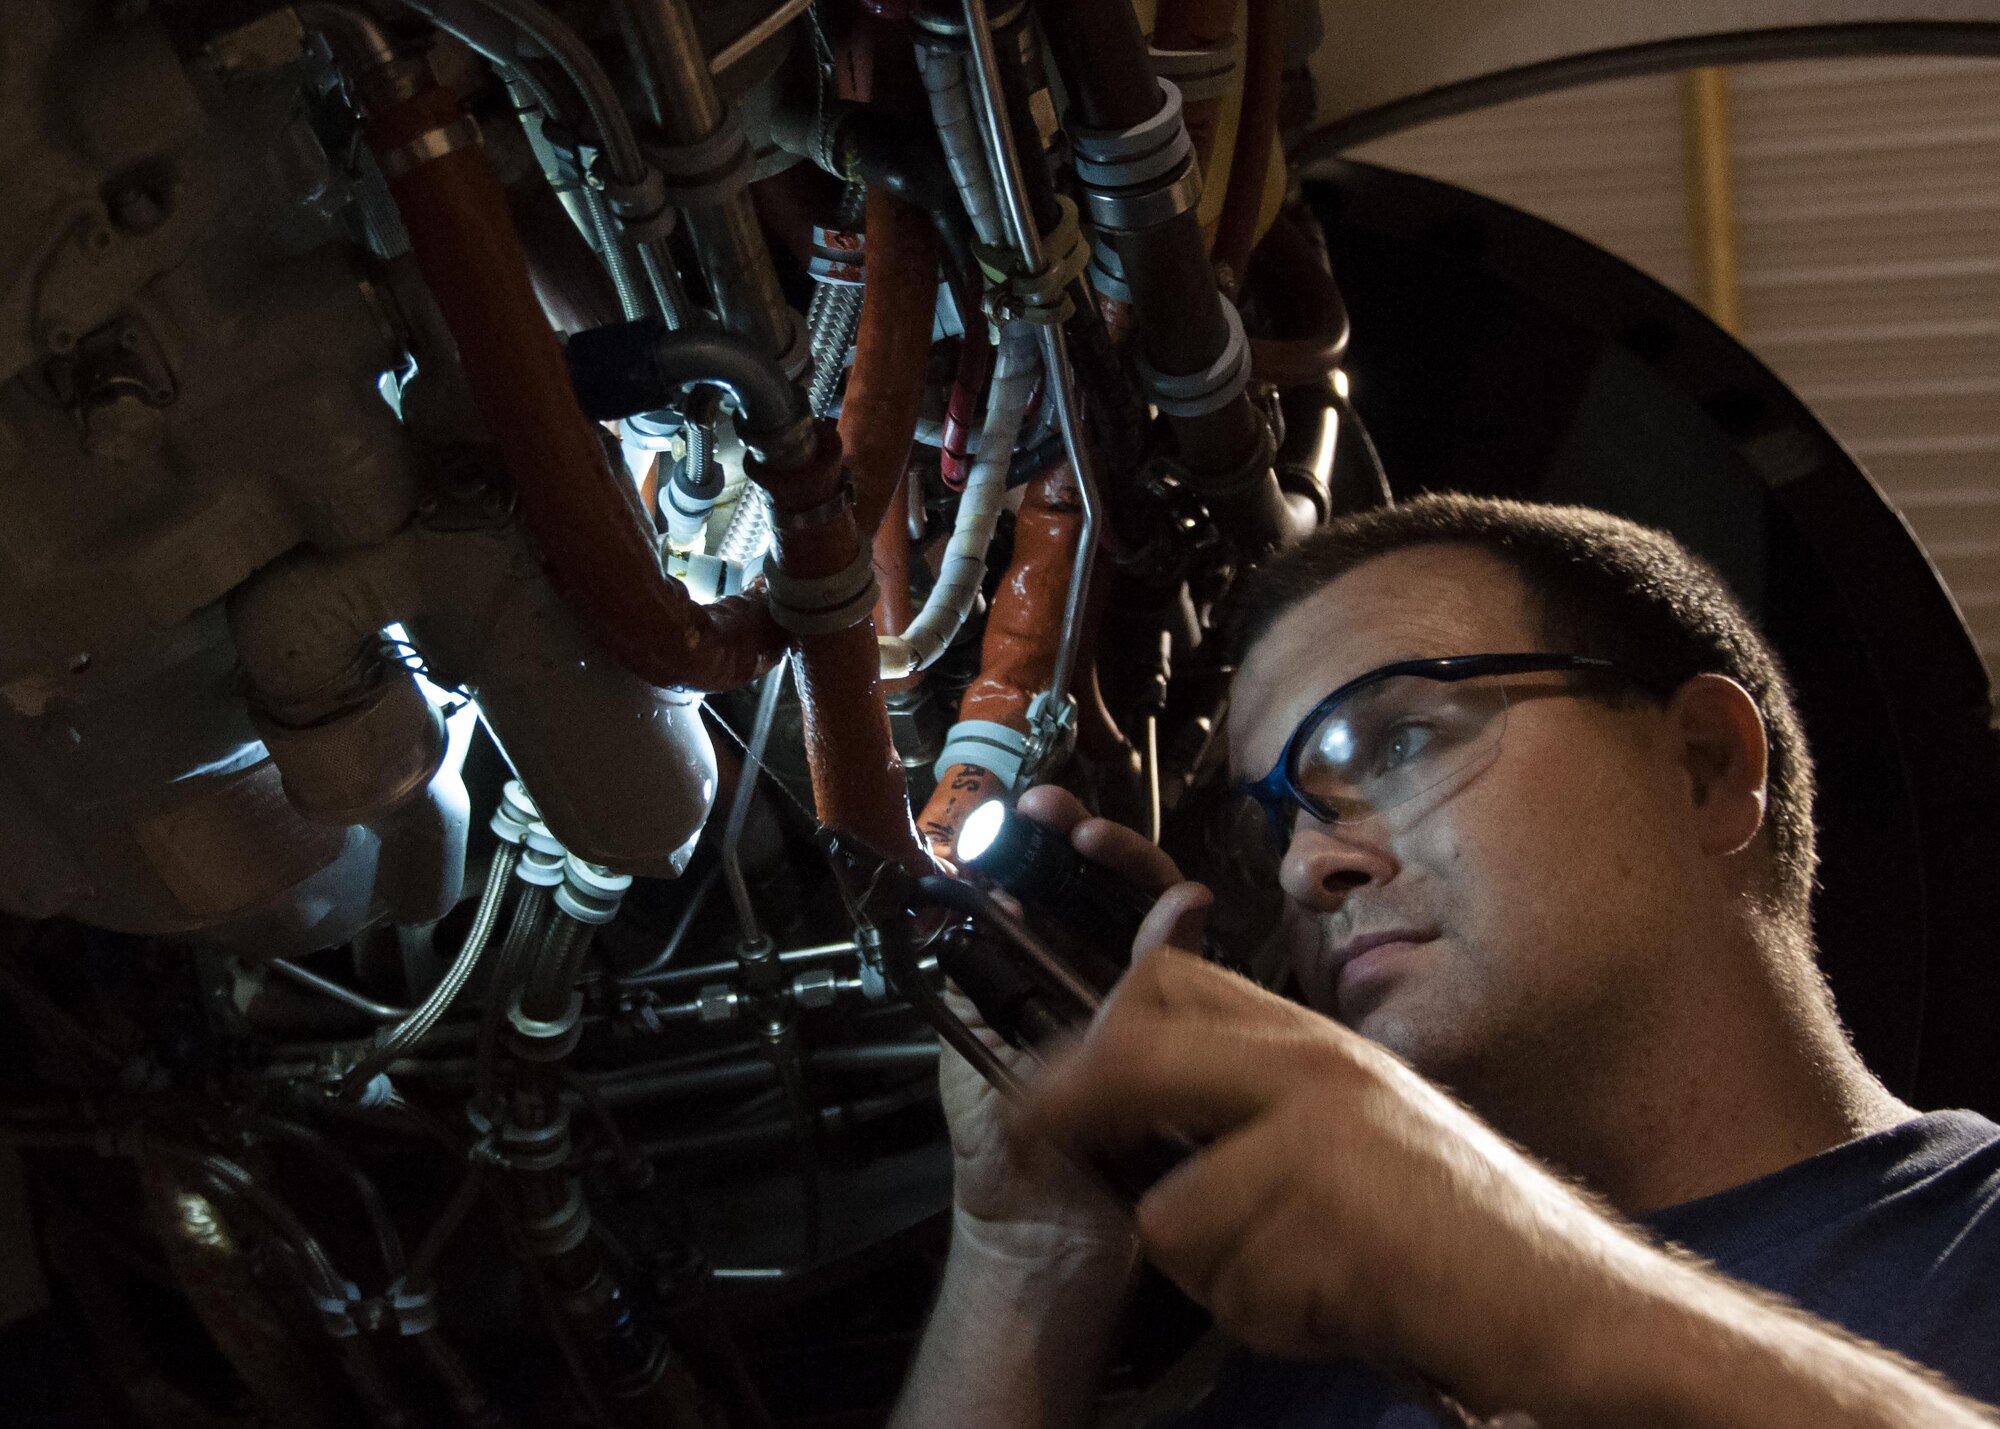 Tech. Sgt. Russell Roberts, a crew chief with the 442nd Maintenance Squadron, attaches a new integrated drive generator to the engine of an A-10 Thunderbolt II at Whiteman Air Force Base, Mo., Aug. 15, 2016. The maintenance crew found debris in the sight glass of the previous IDG, which caused the engine to lose power. (U.S. Air Force photo/Senior Airman Missy Sterling)